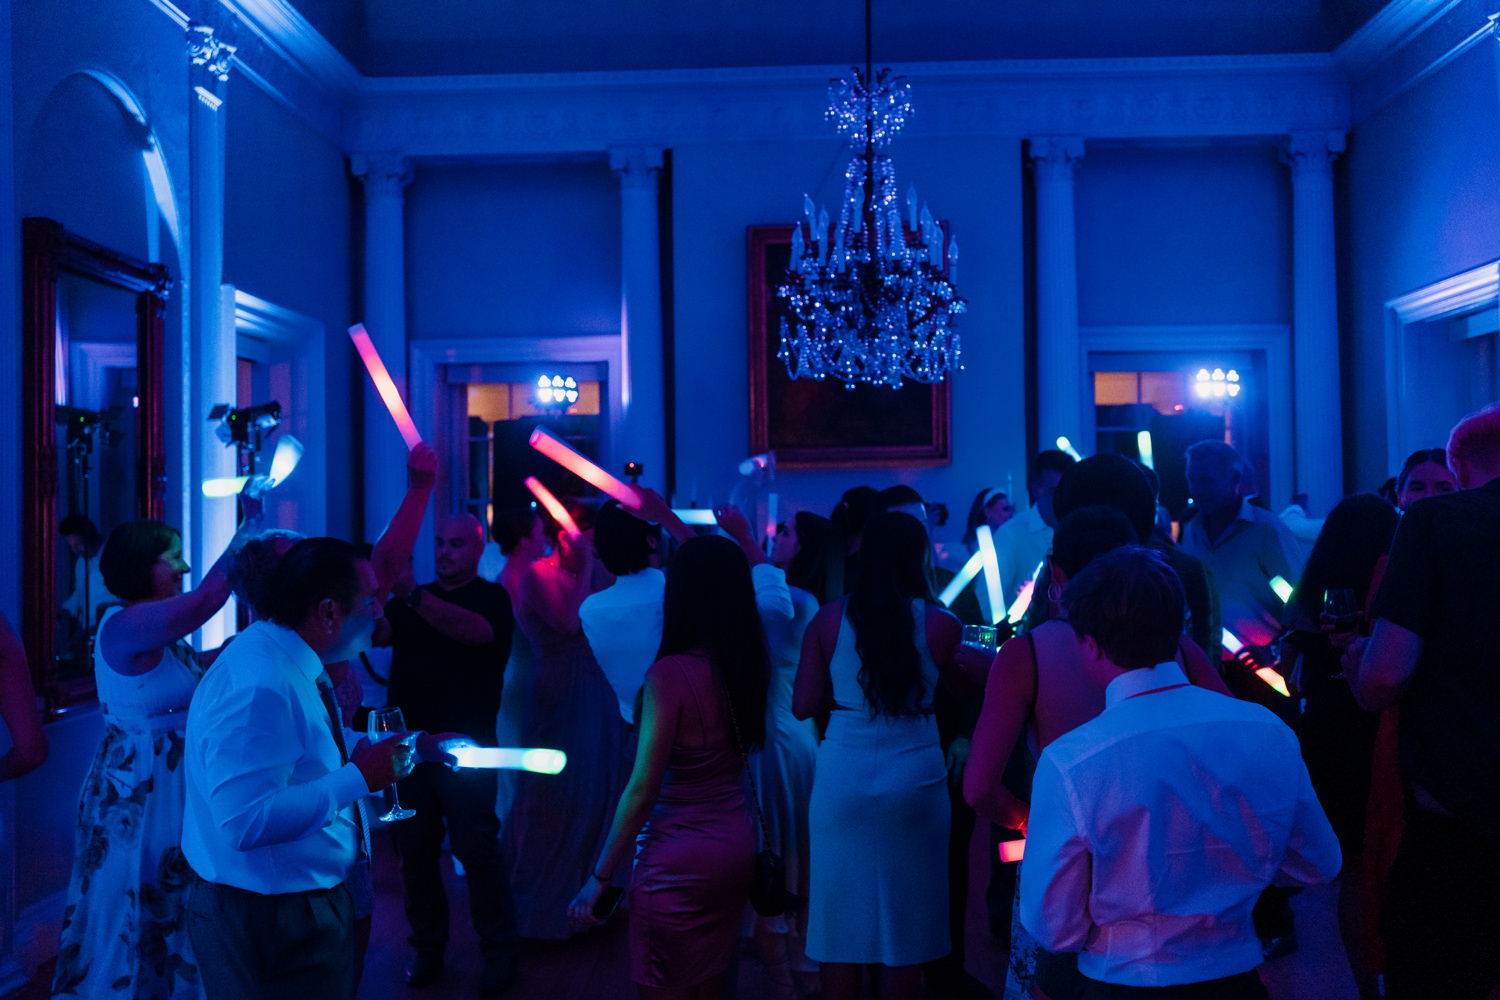 A group of people holding up light sabers in a dark room.